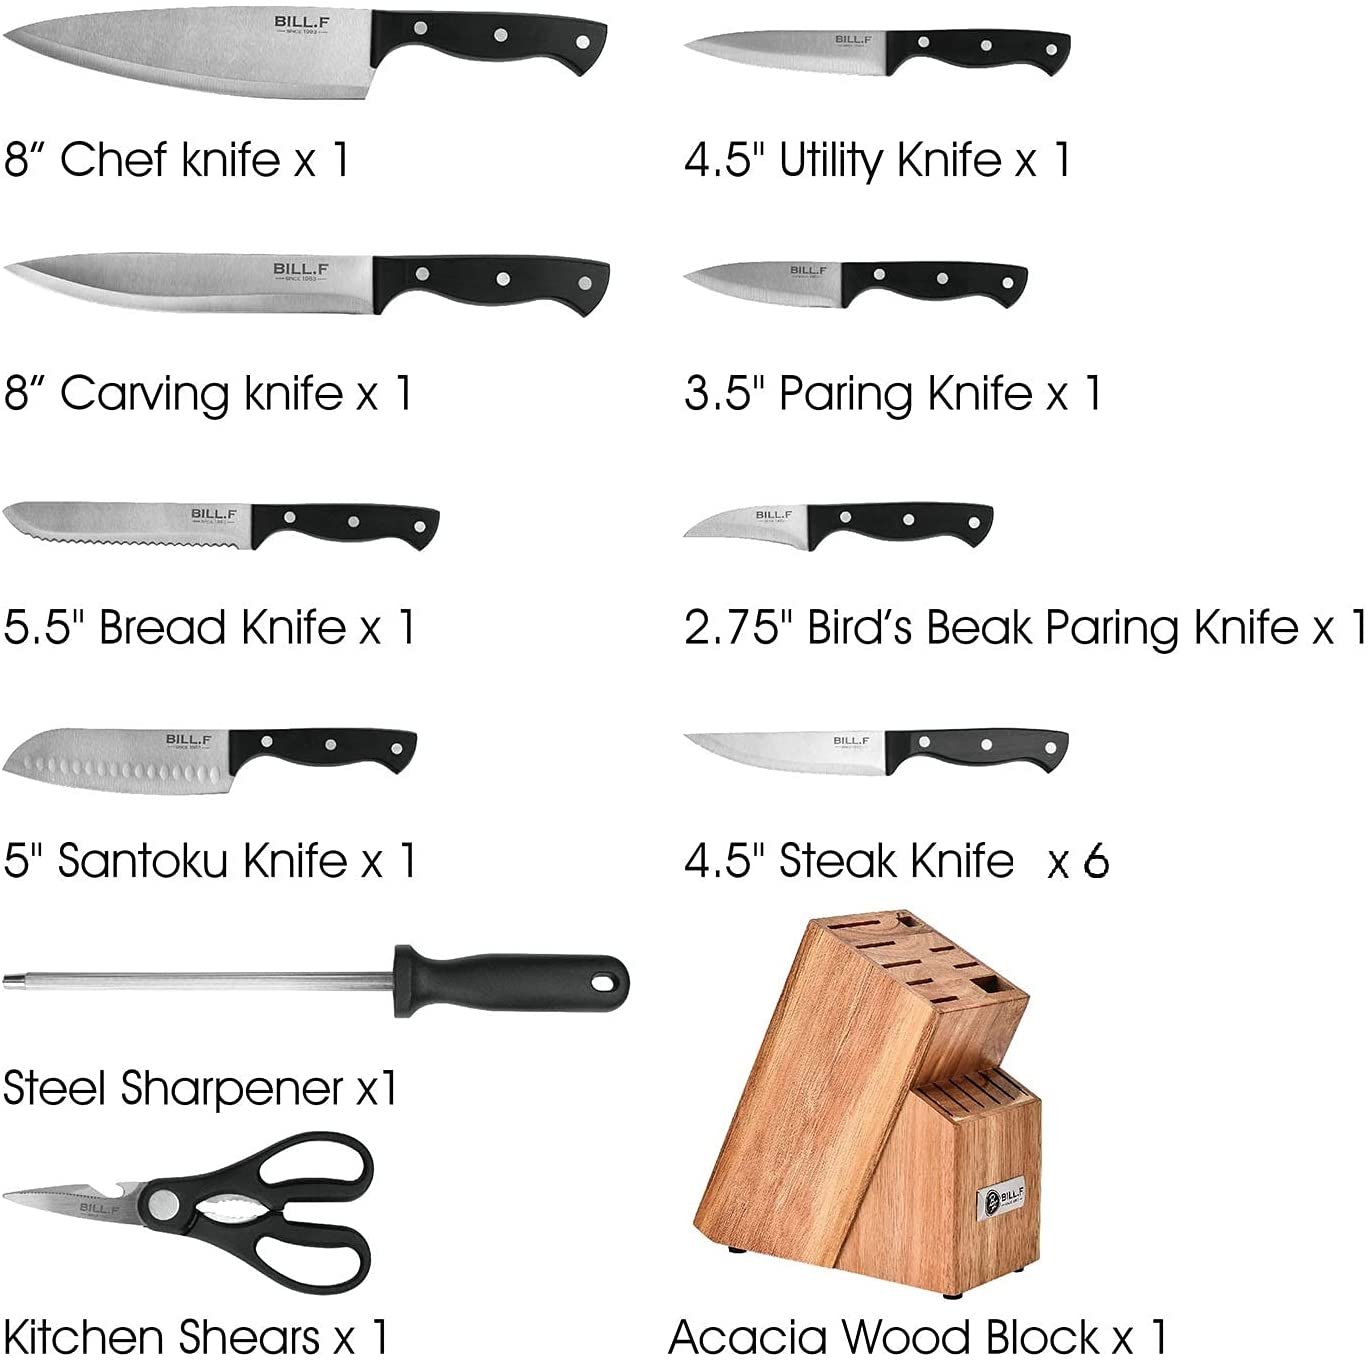 Bill.F® 17-Piece Cutlery Knife Block Set with Built-in Sharpener